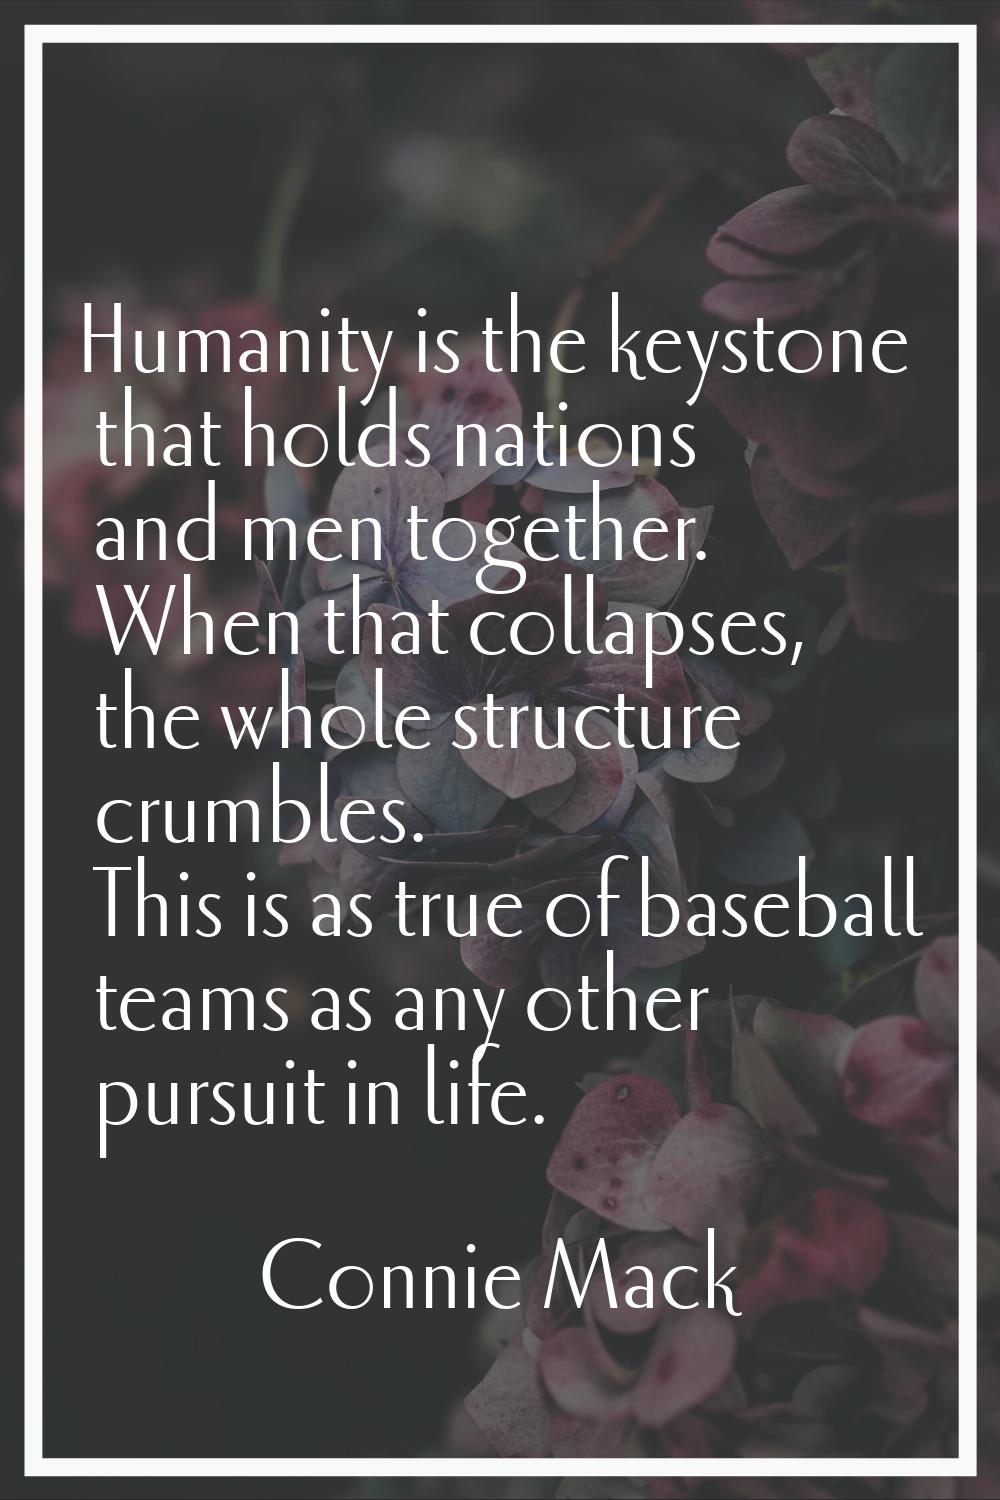 Humanity is the keystone that holds nations and men together. When that collapses, the whole struct